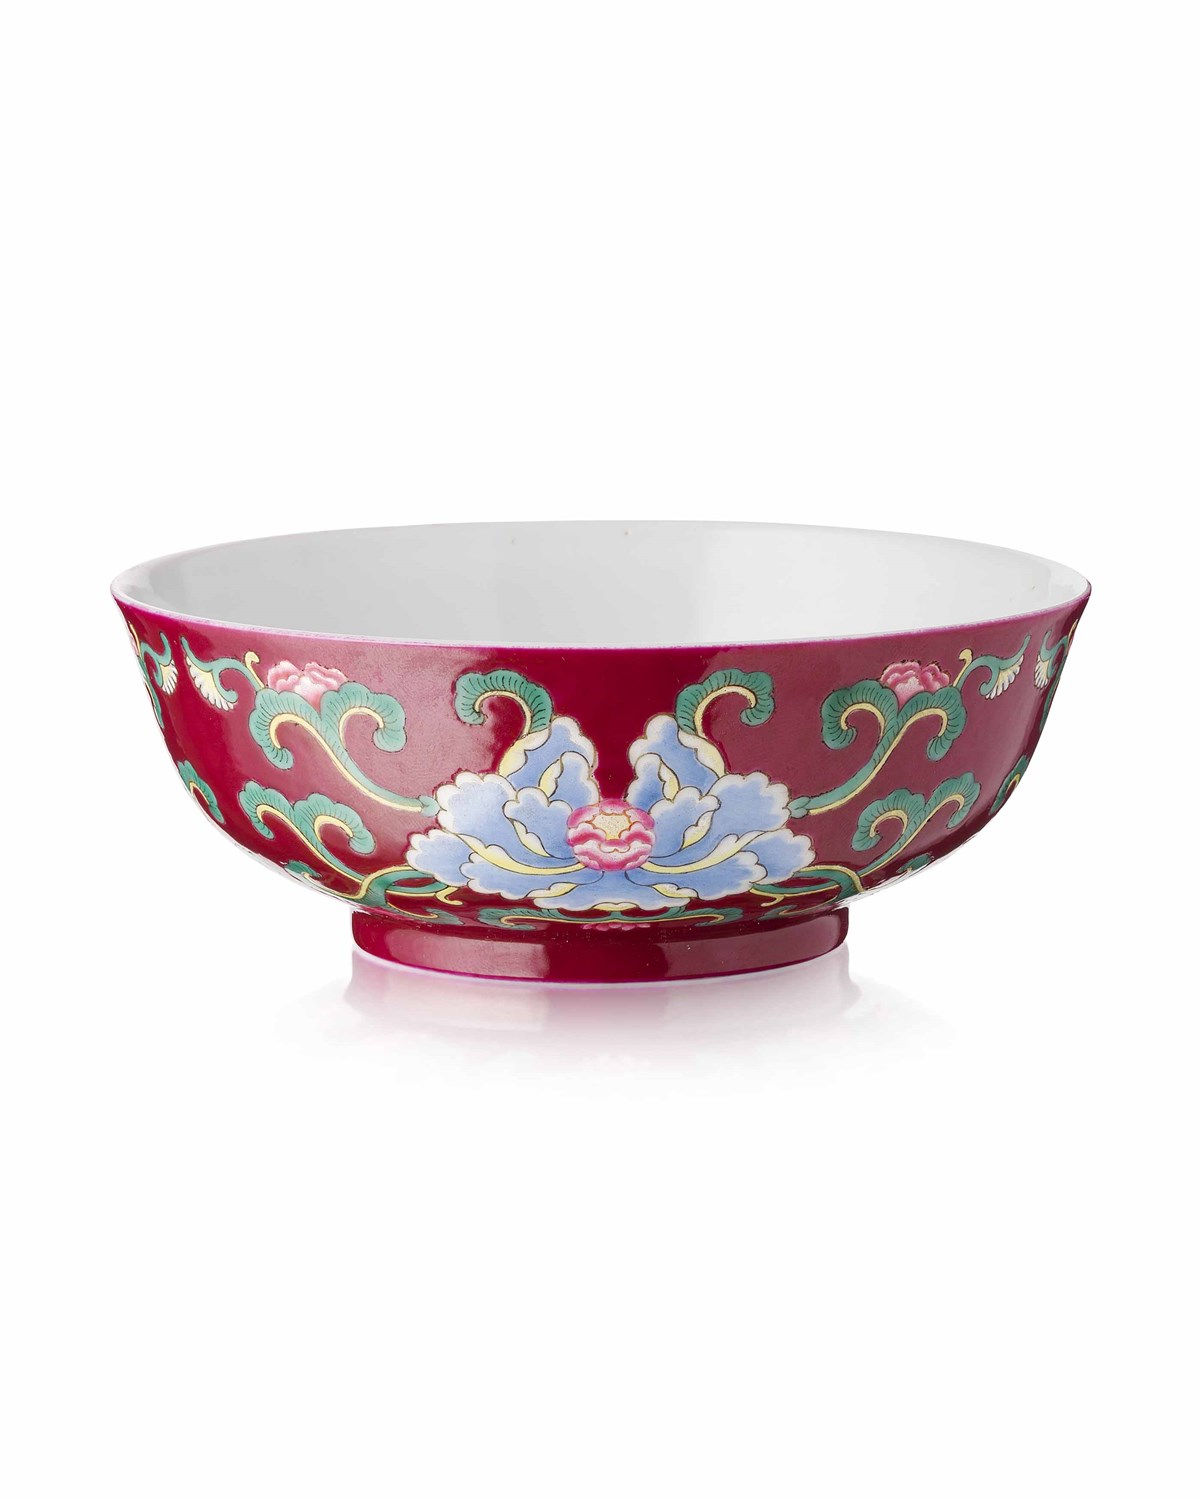 Lot 866 - FINE AND RARE RUBY-GROUND FAMILLE-ROSE 'PEONY' BOWL